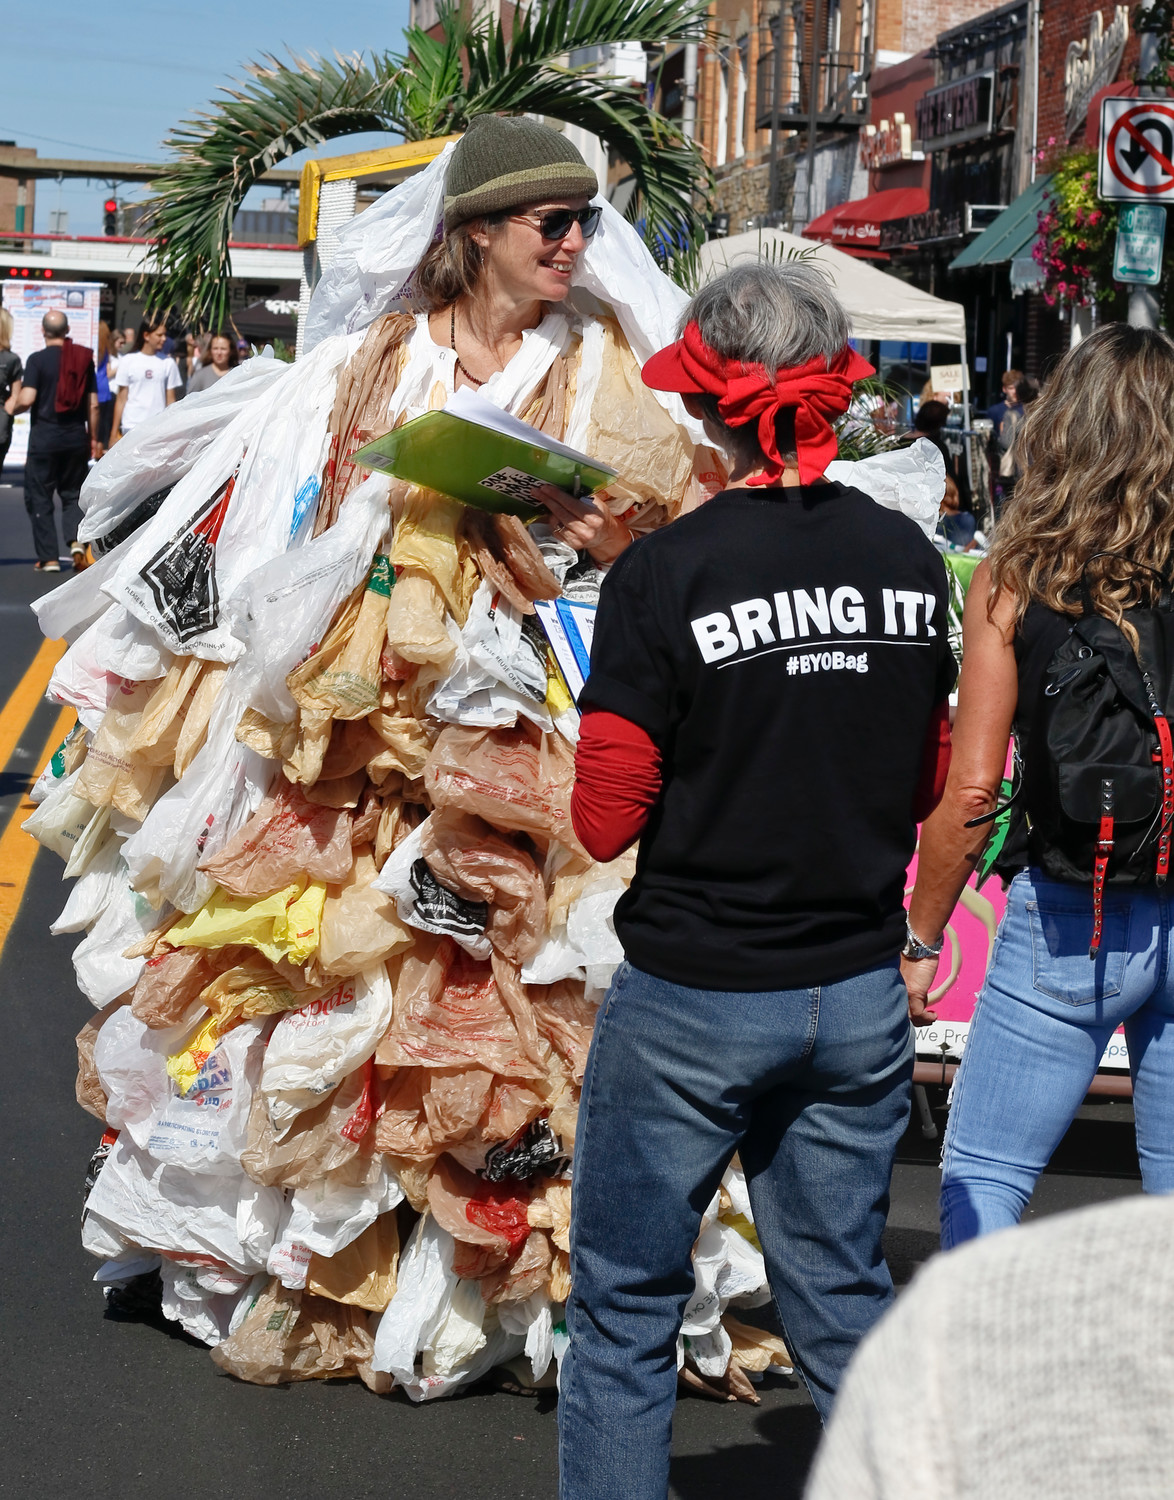 Susan Brockmann, also know as the “Bag Lady,” asked festival-goers in Rockville Centre on Sept. 30 to sign a petition urging the village to create a reusable bag ordinance.